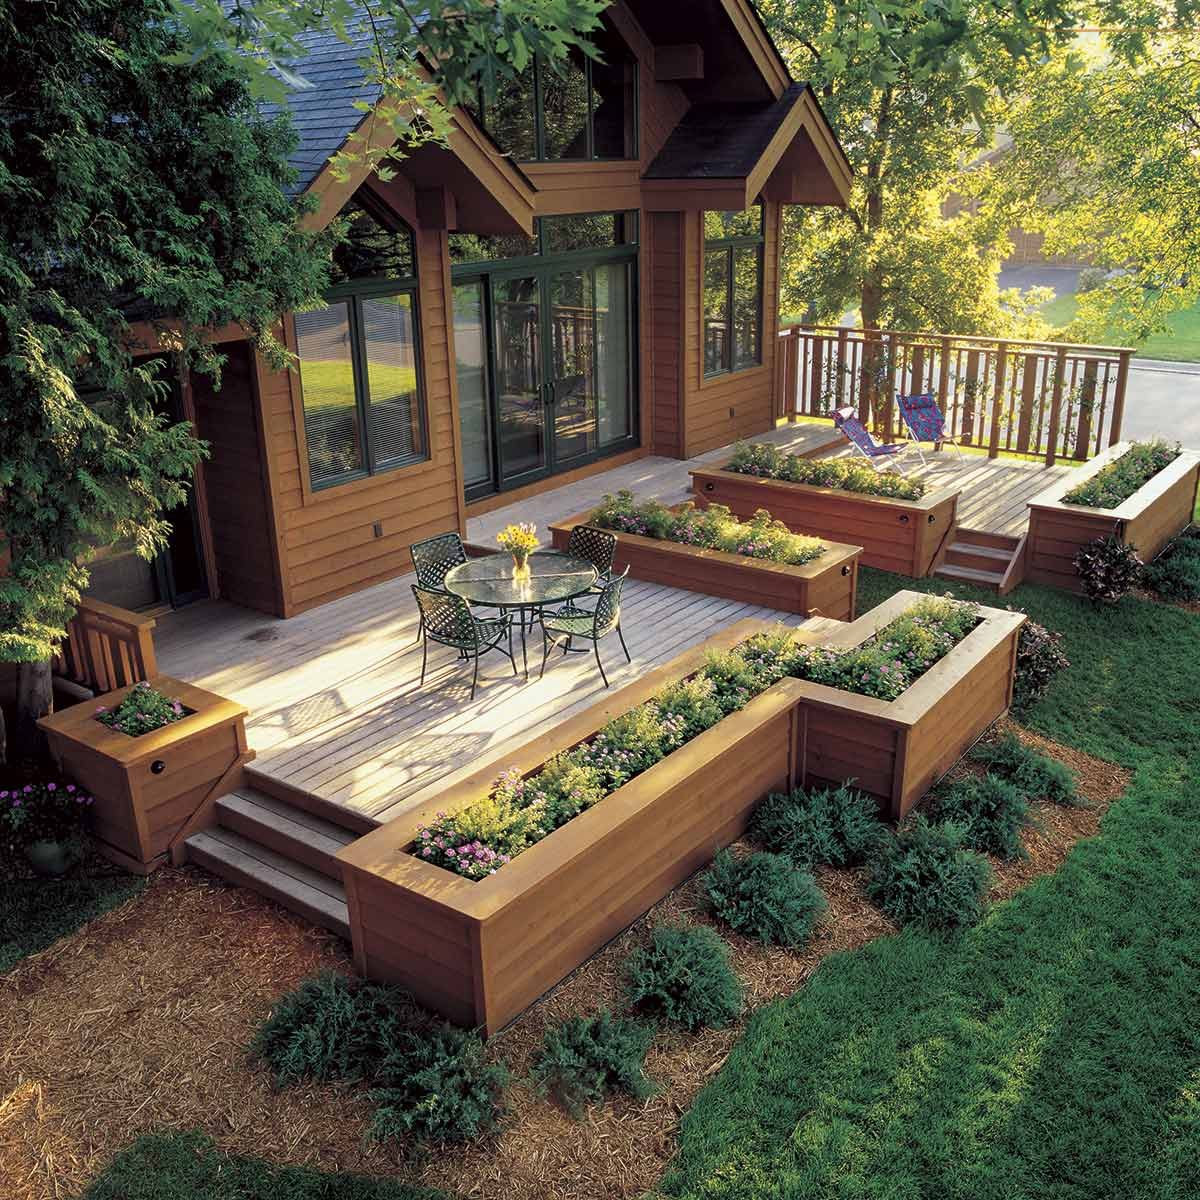 List 94+ Pictures Photos Of Decks And Patios Completed